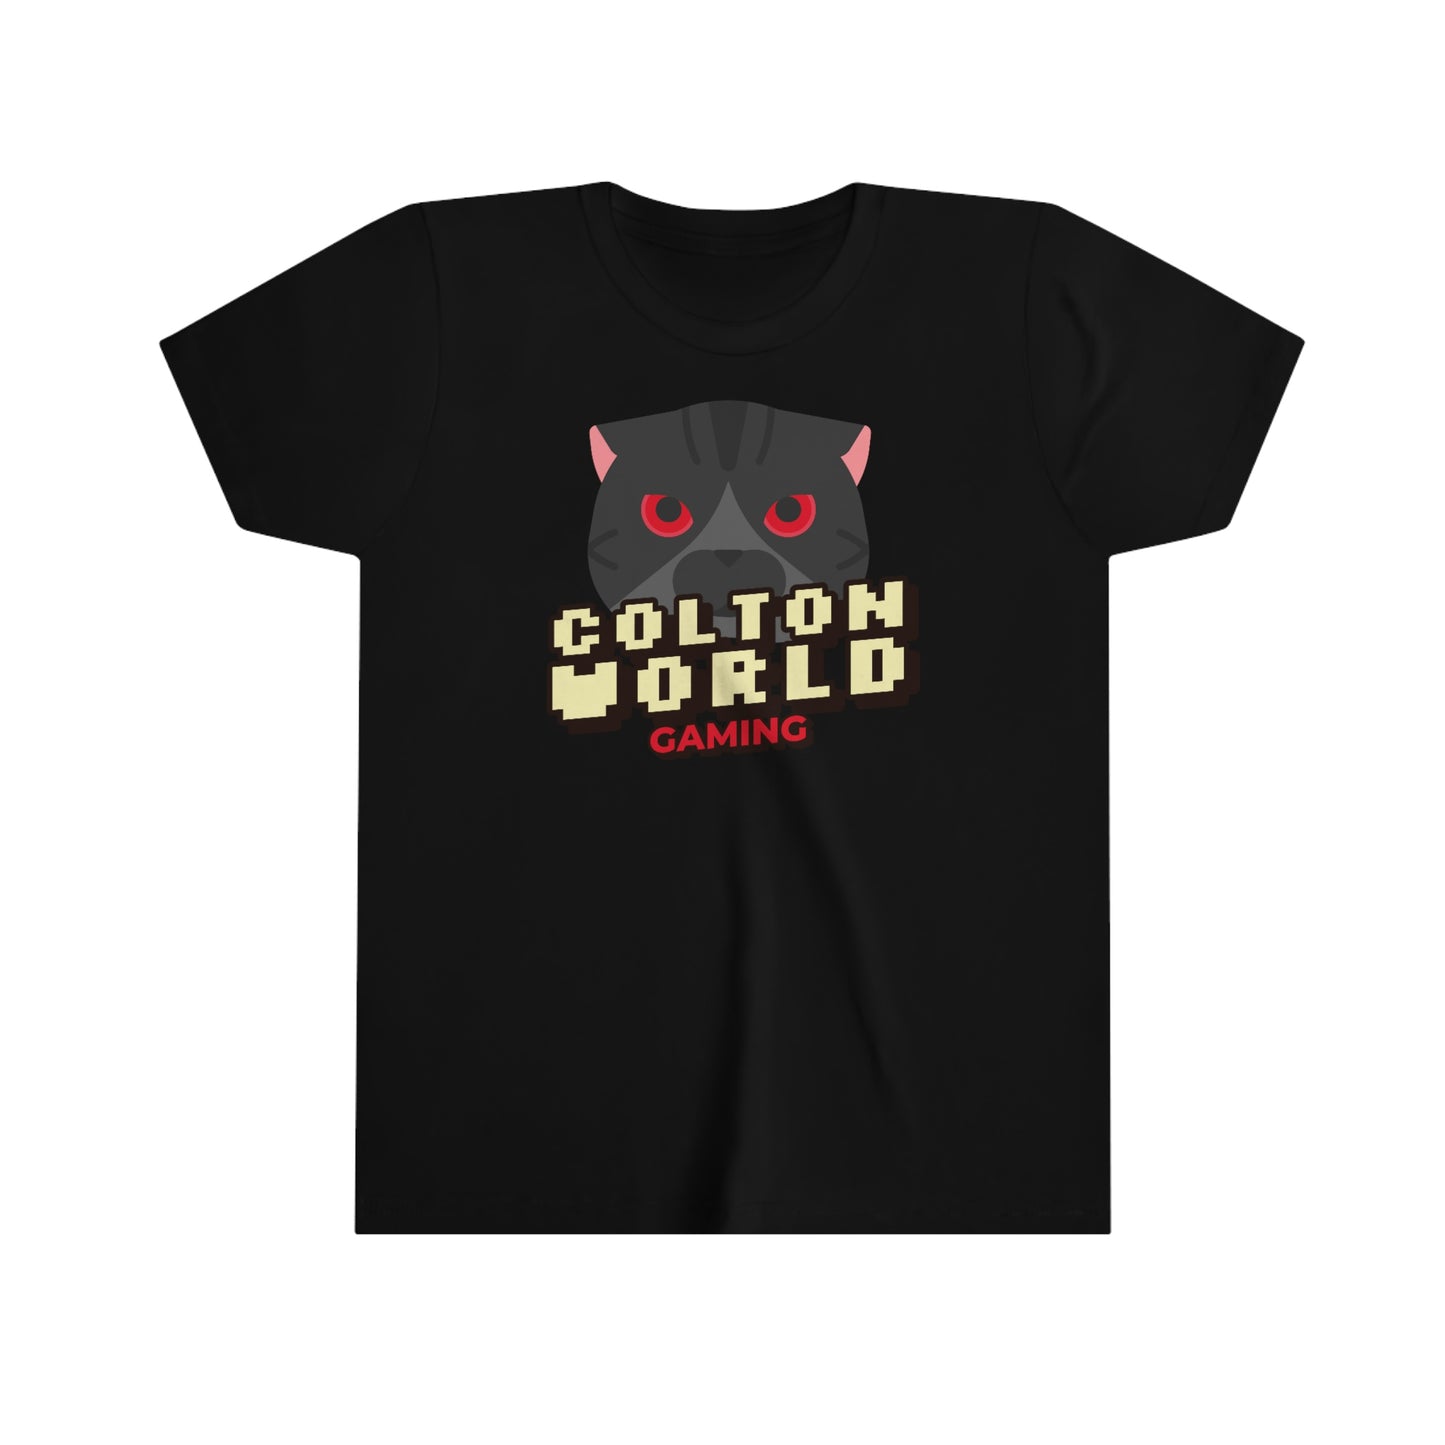 Youth Colton World Tee